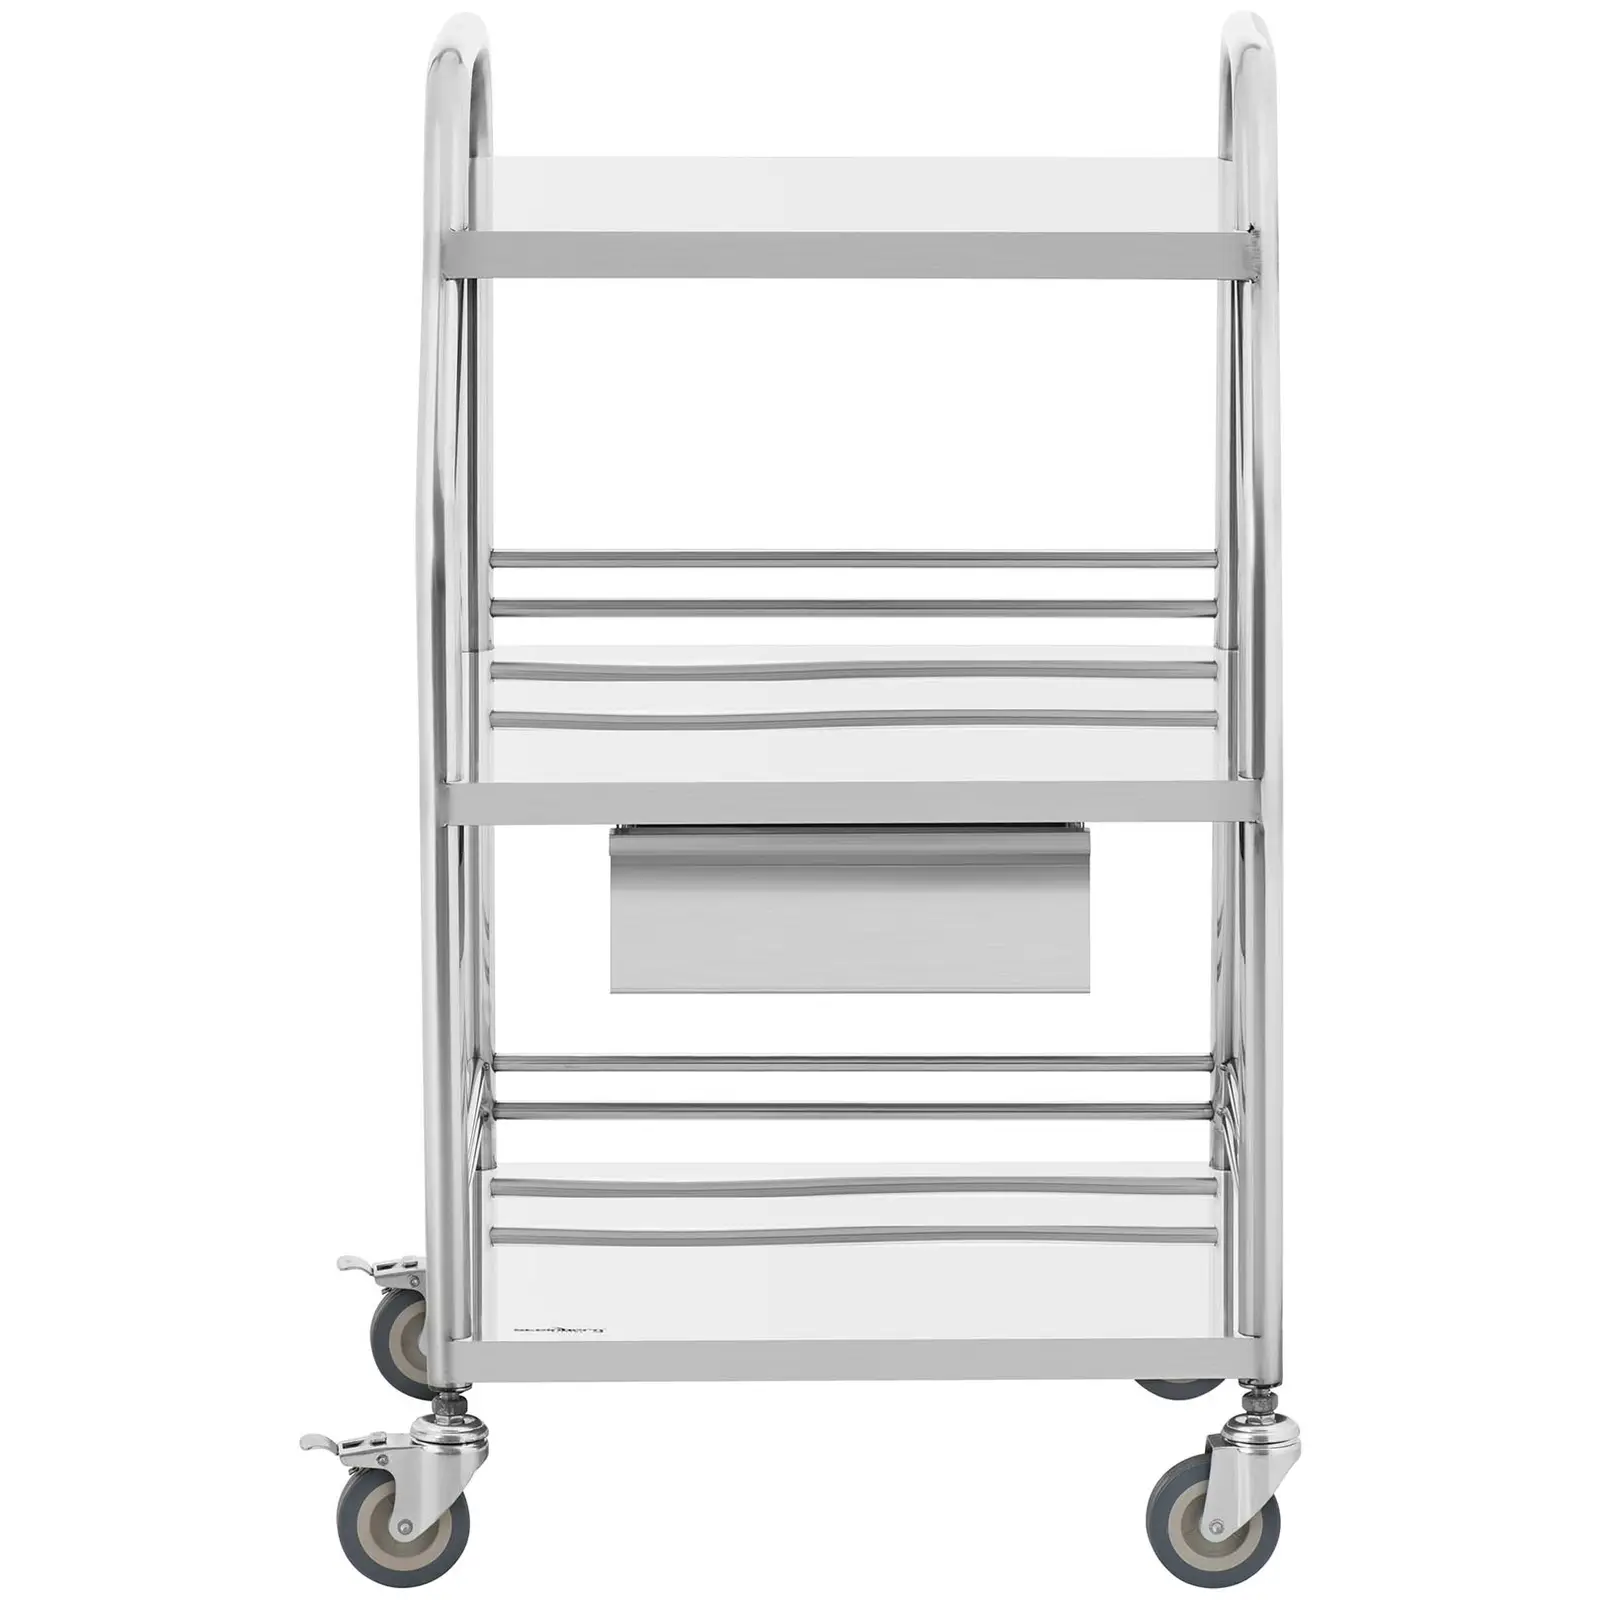 Laboratory Trolley - stainless steel - 3 shelves - 1 drawer - 30 kg